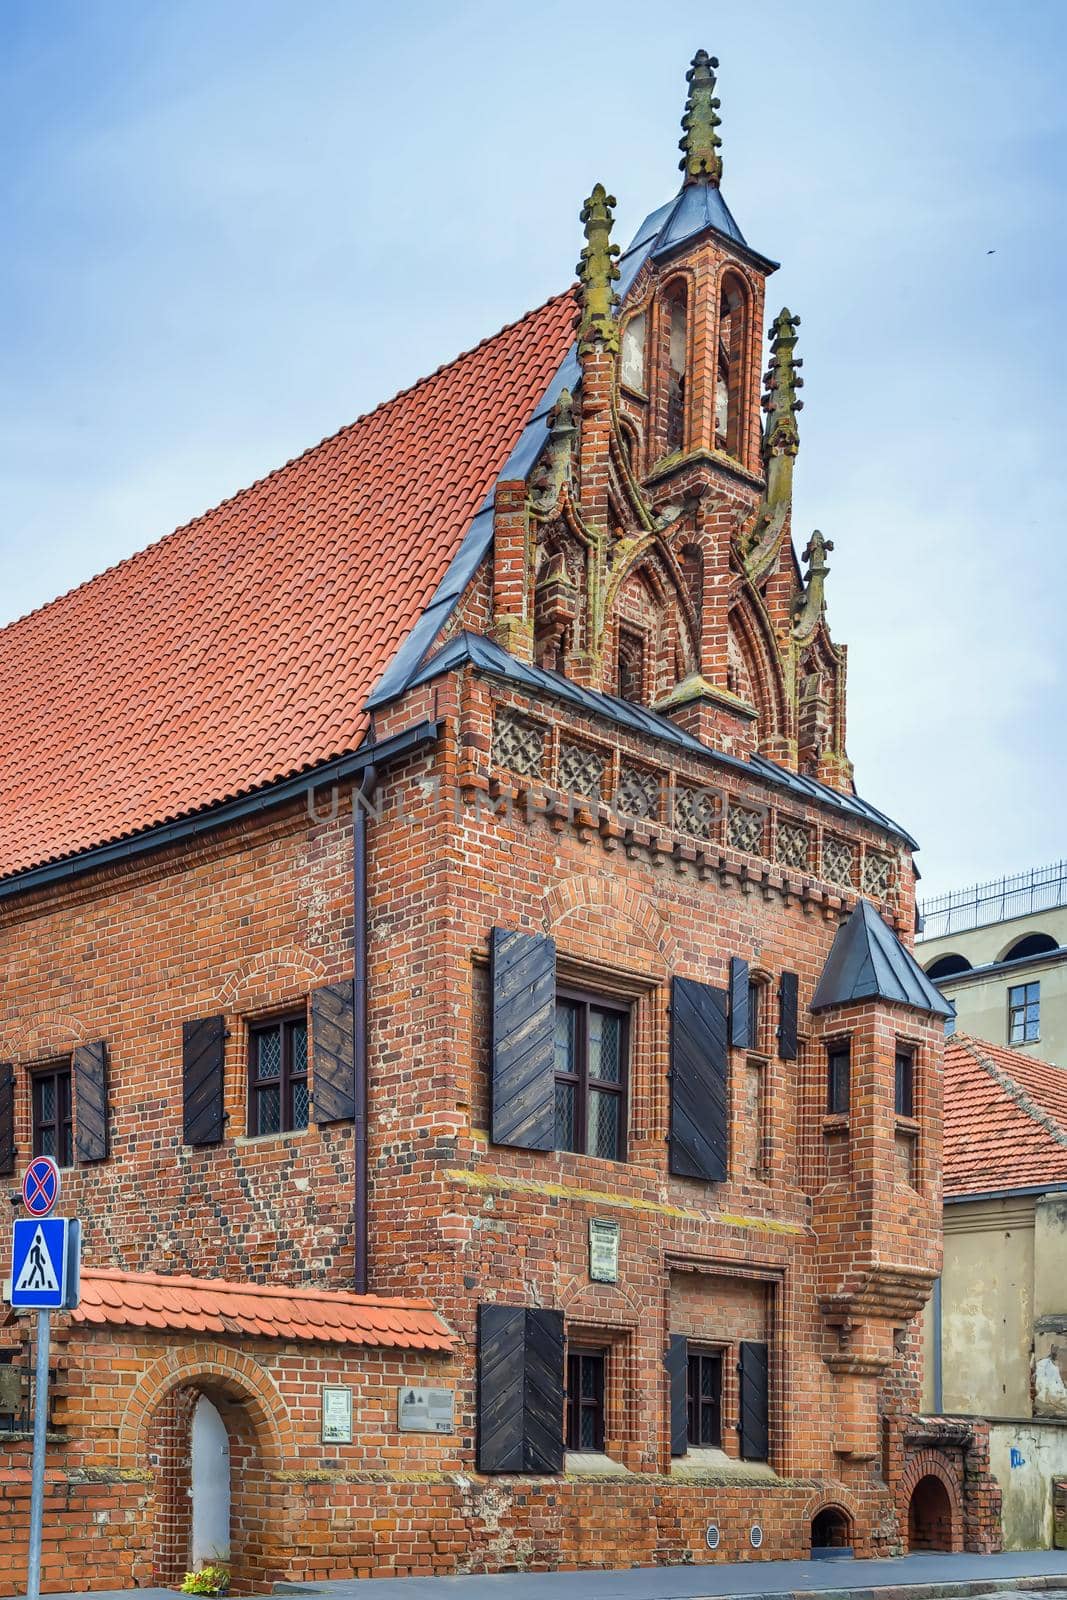 House of Perkunas is one of the most original and Gothic secular buildings, located in the Old Town of Kaunas, Lithuania